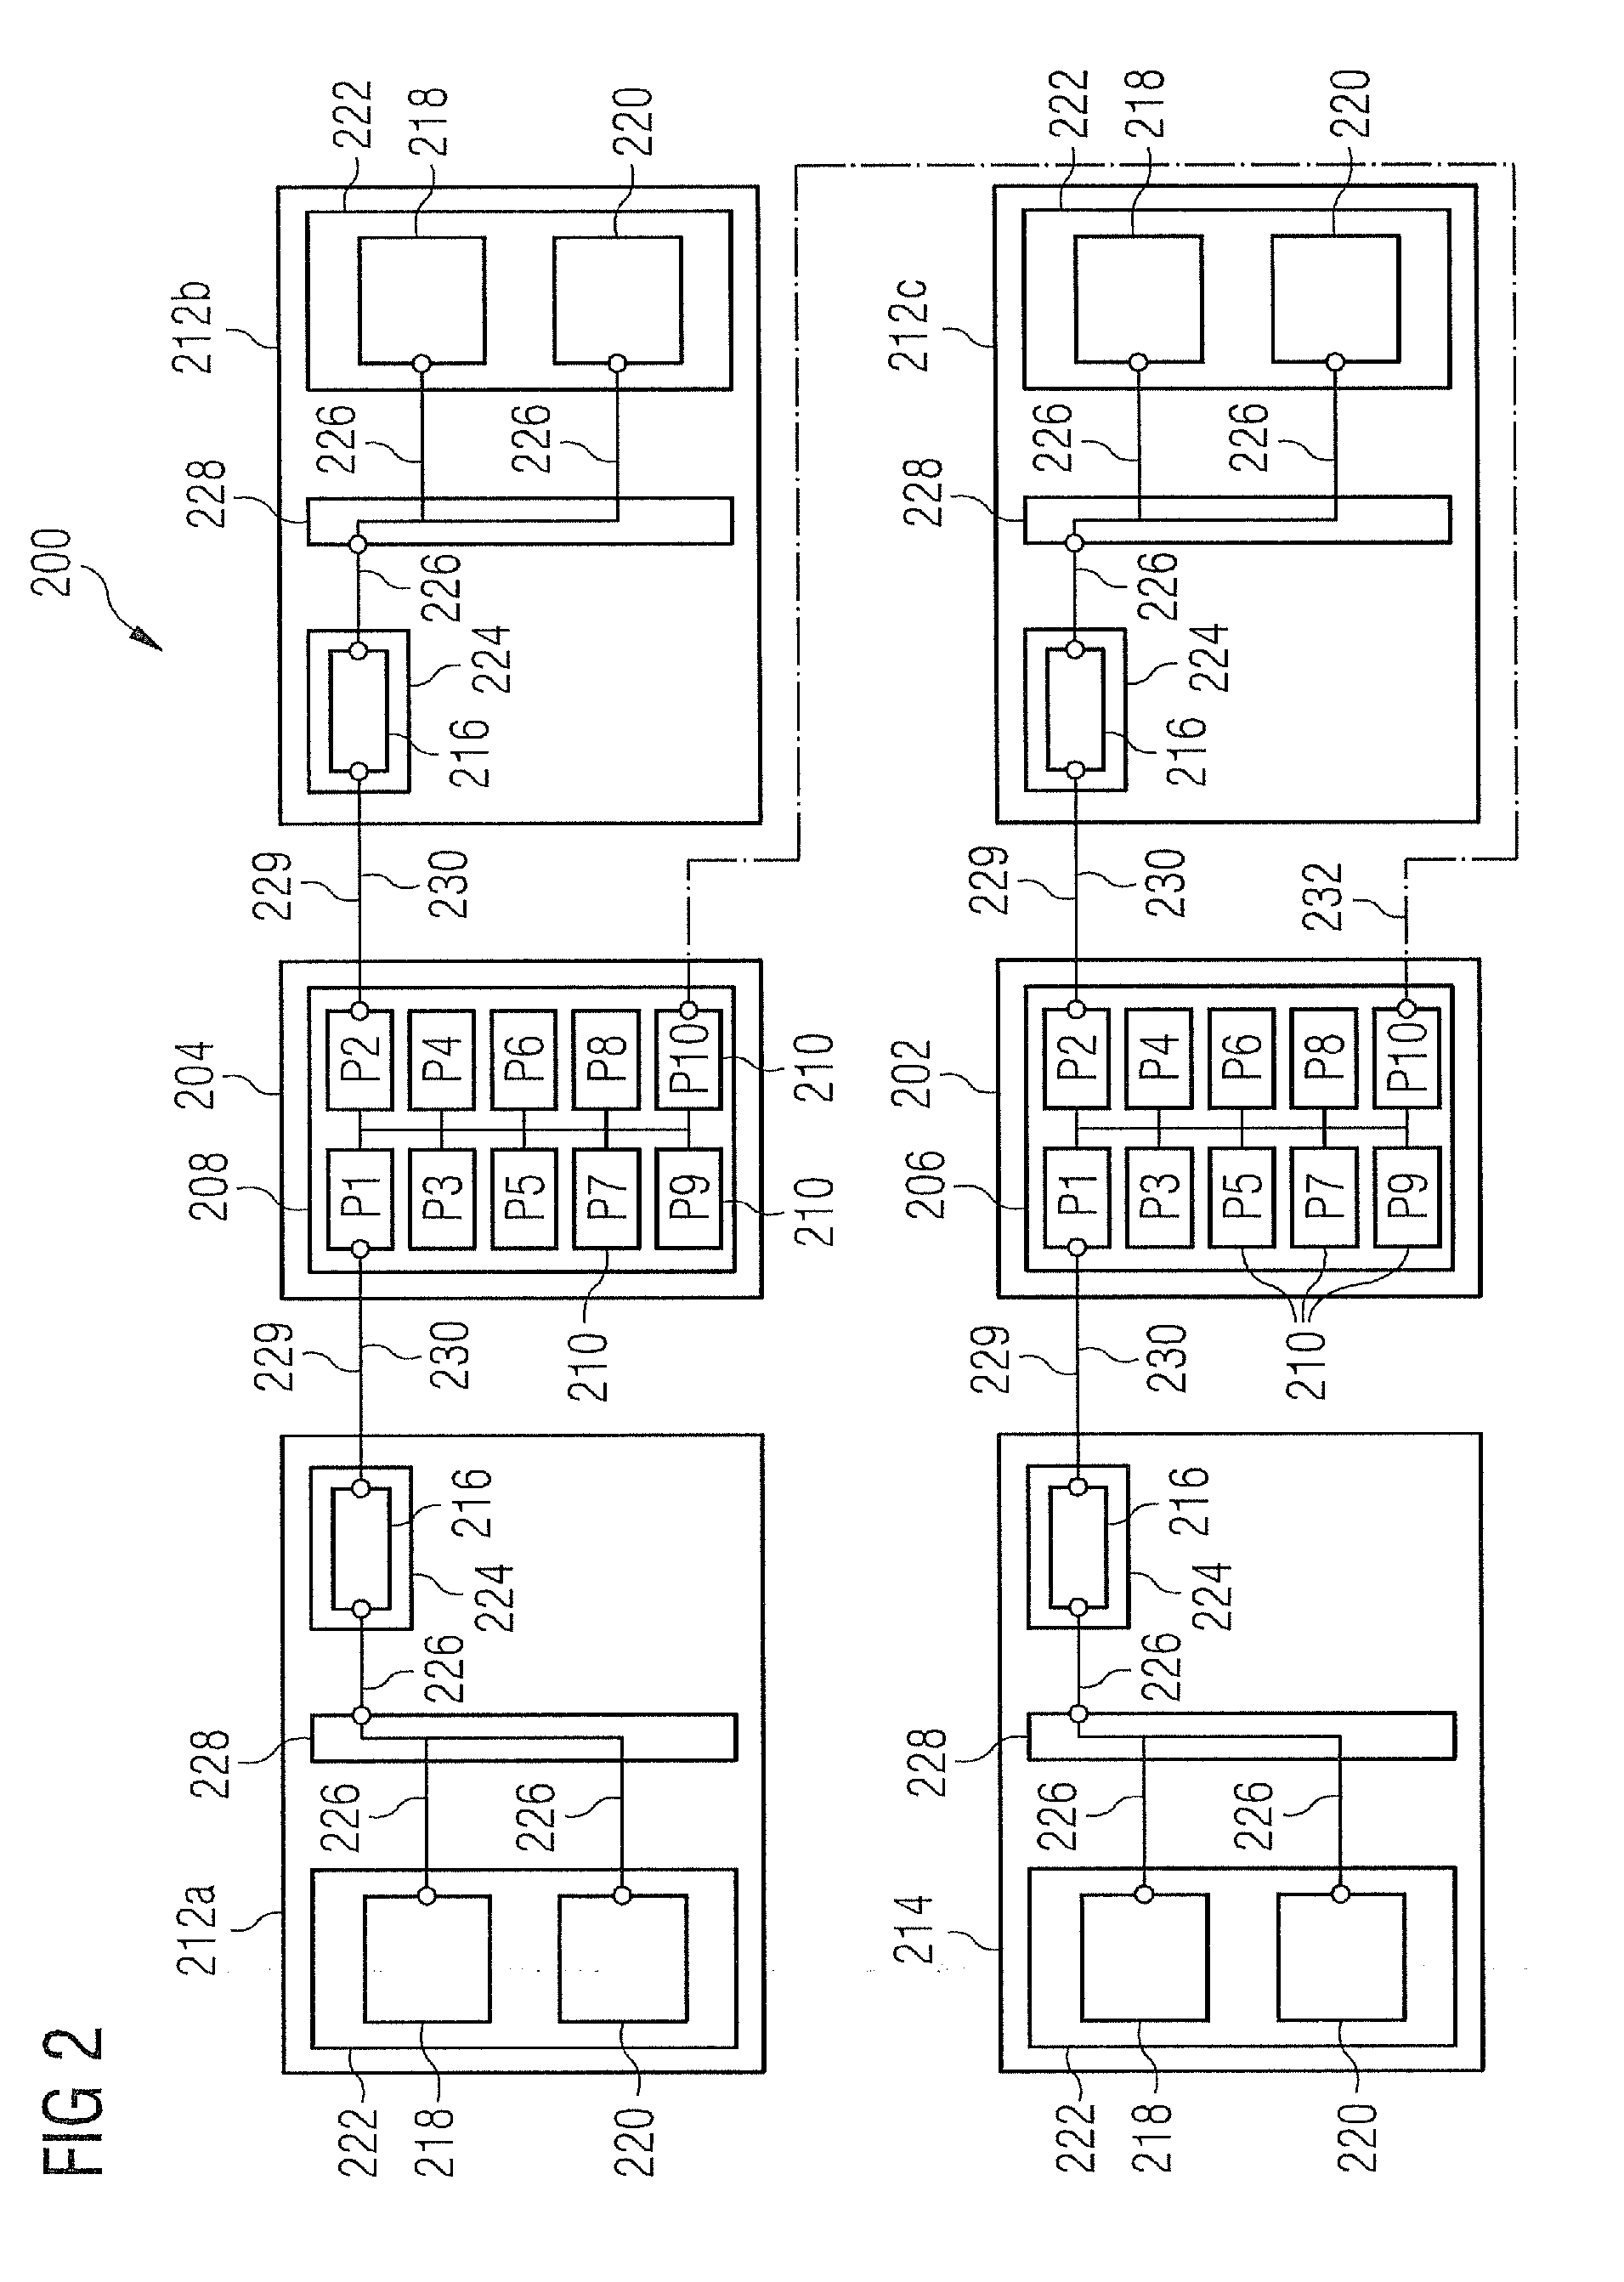 Auto-configuration of network devices